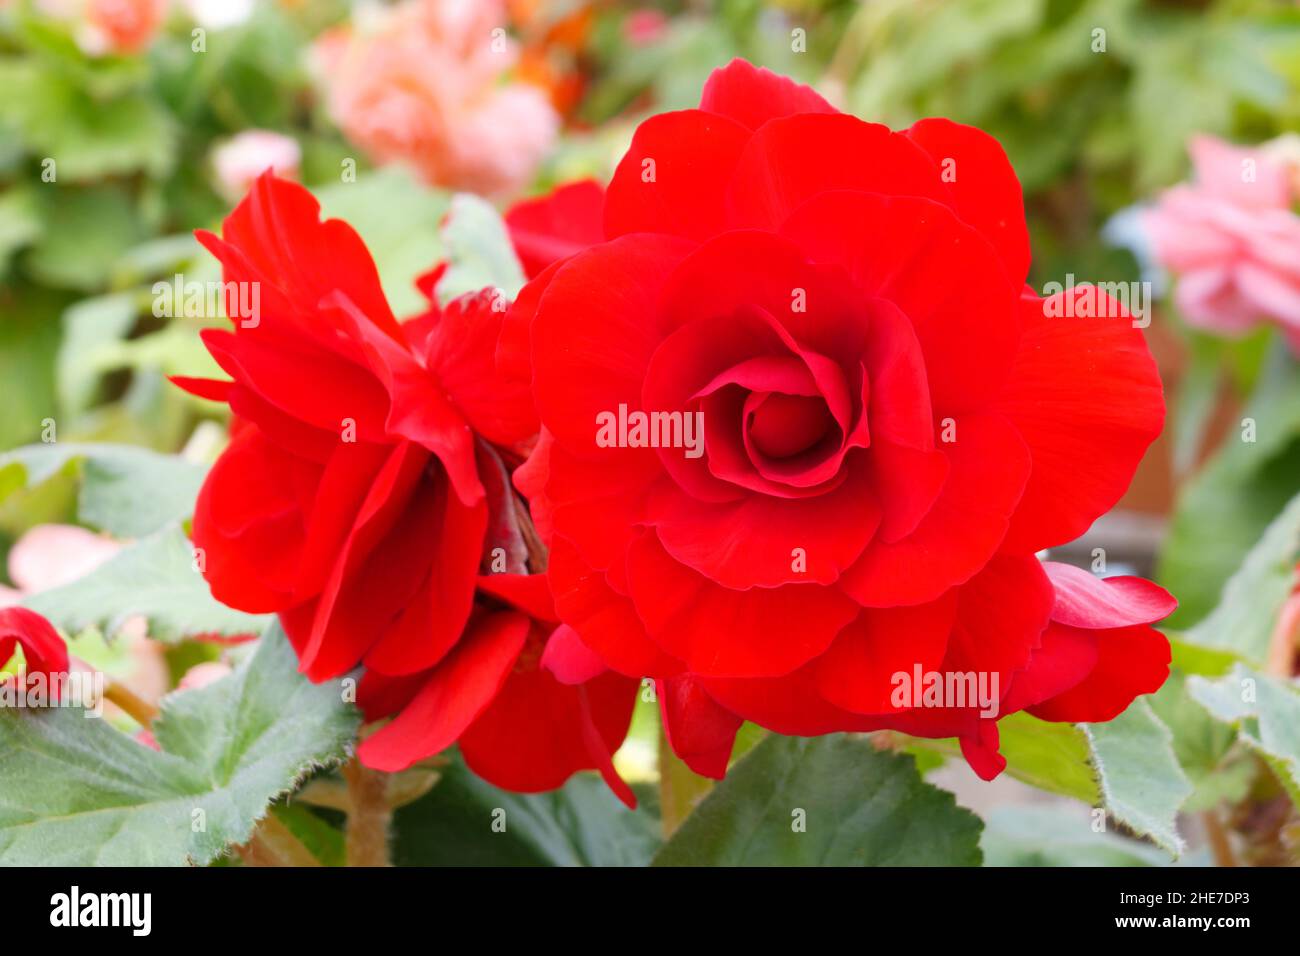 Red Begonia, Deep Red Tuberous Begonias, also called Non-Stop, Double Red Petals, Roseform, Ruffled Red, Upright Flowers in a Garden Stock Photo